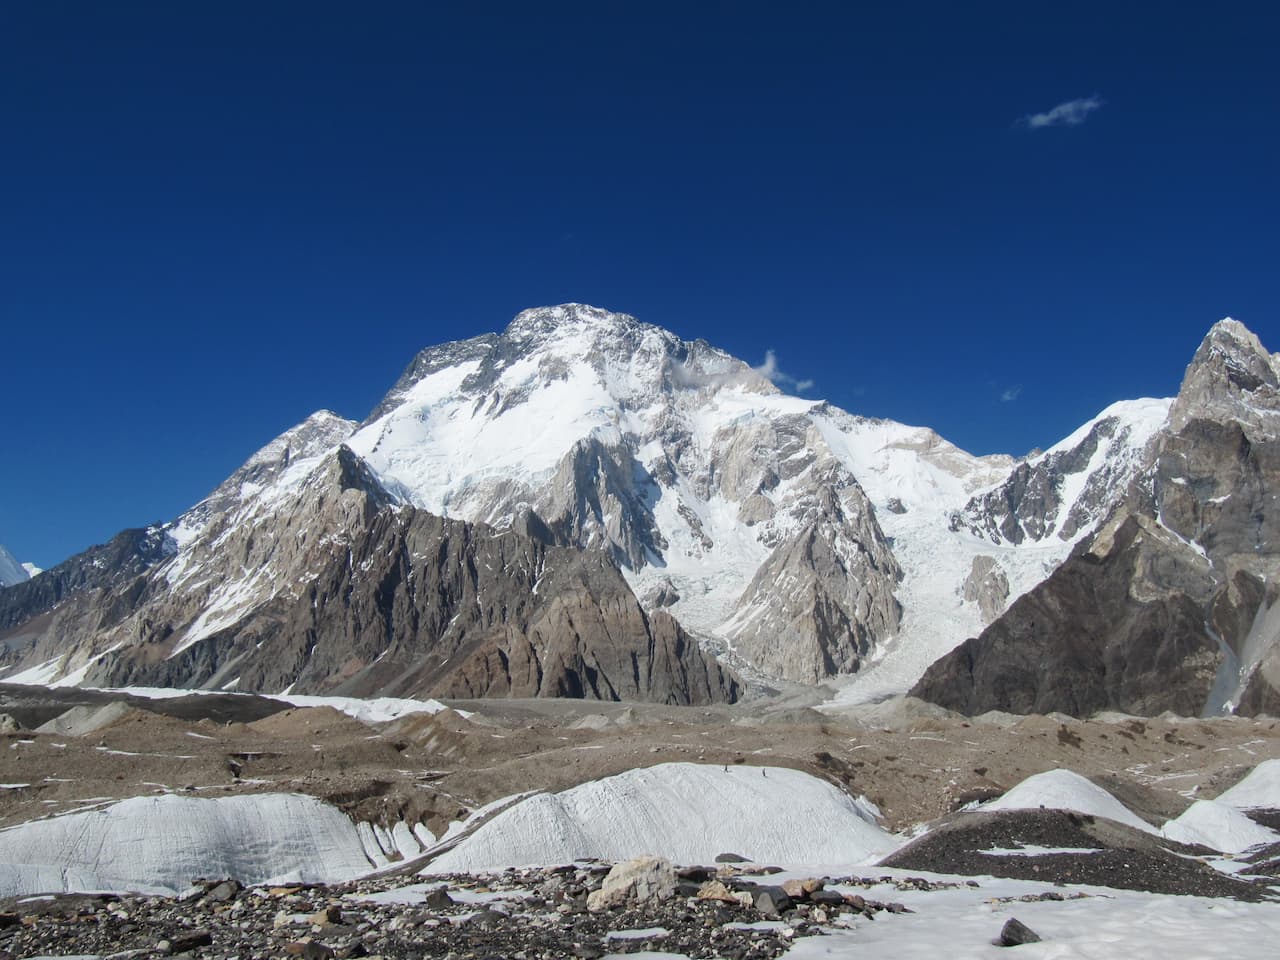 22 Broad Peak from Concordia 6th stage 1280x960